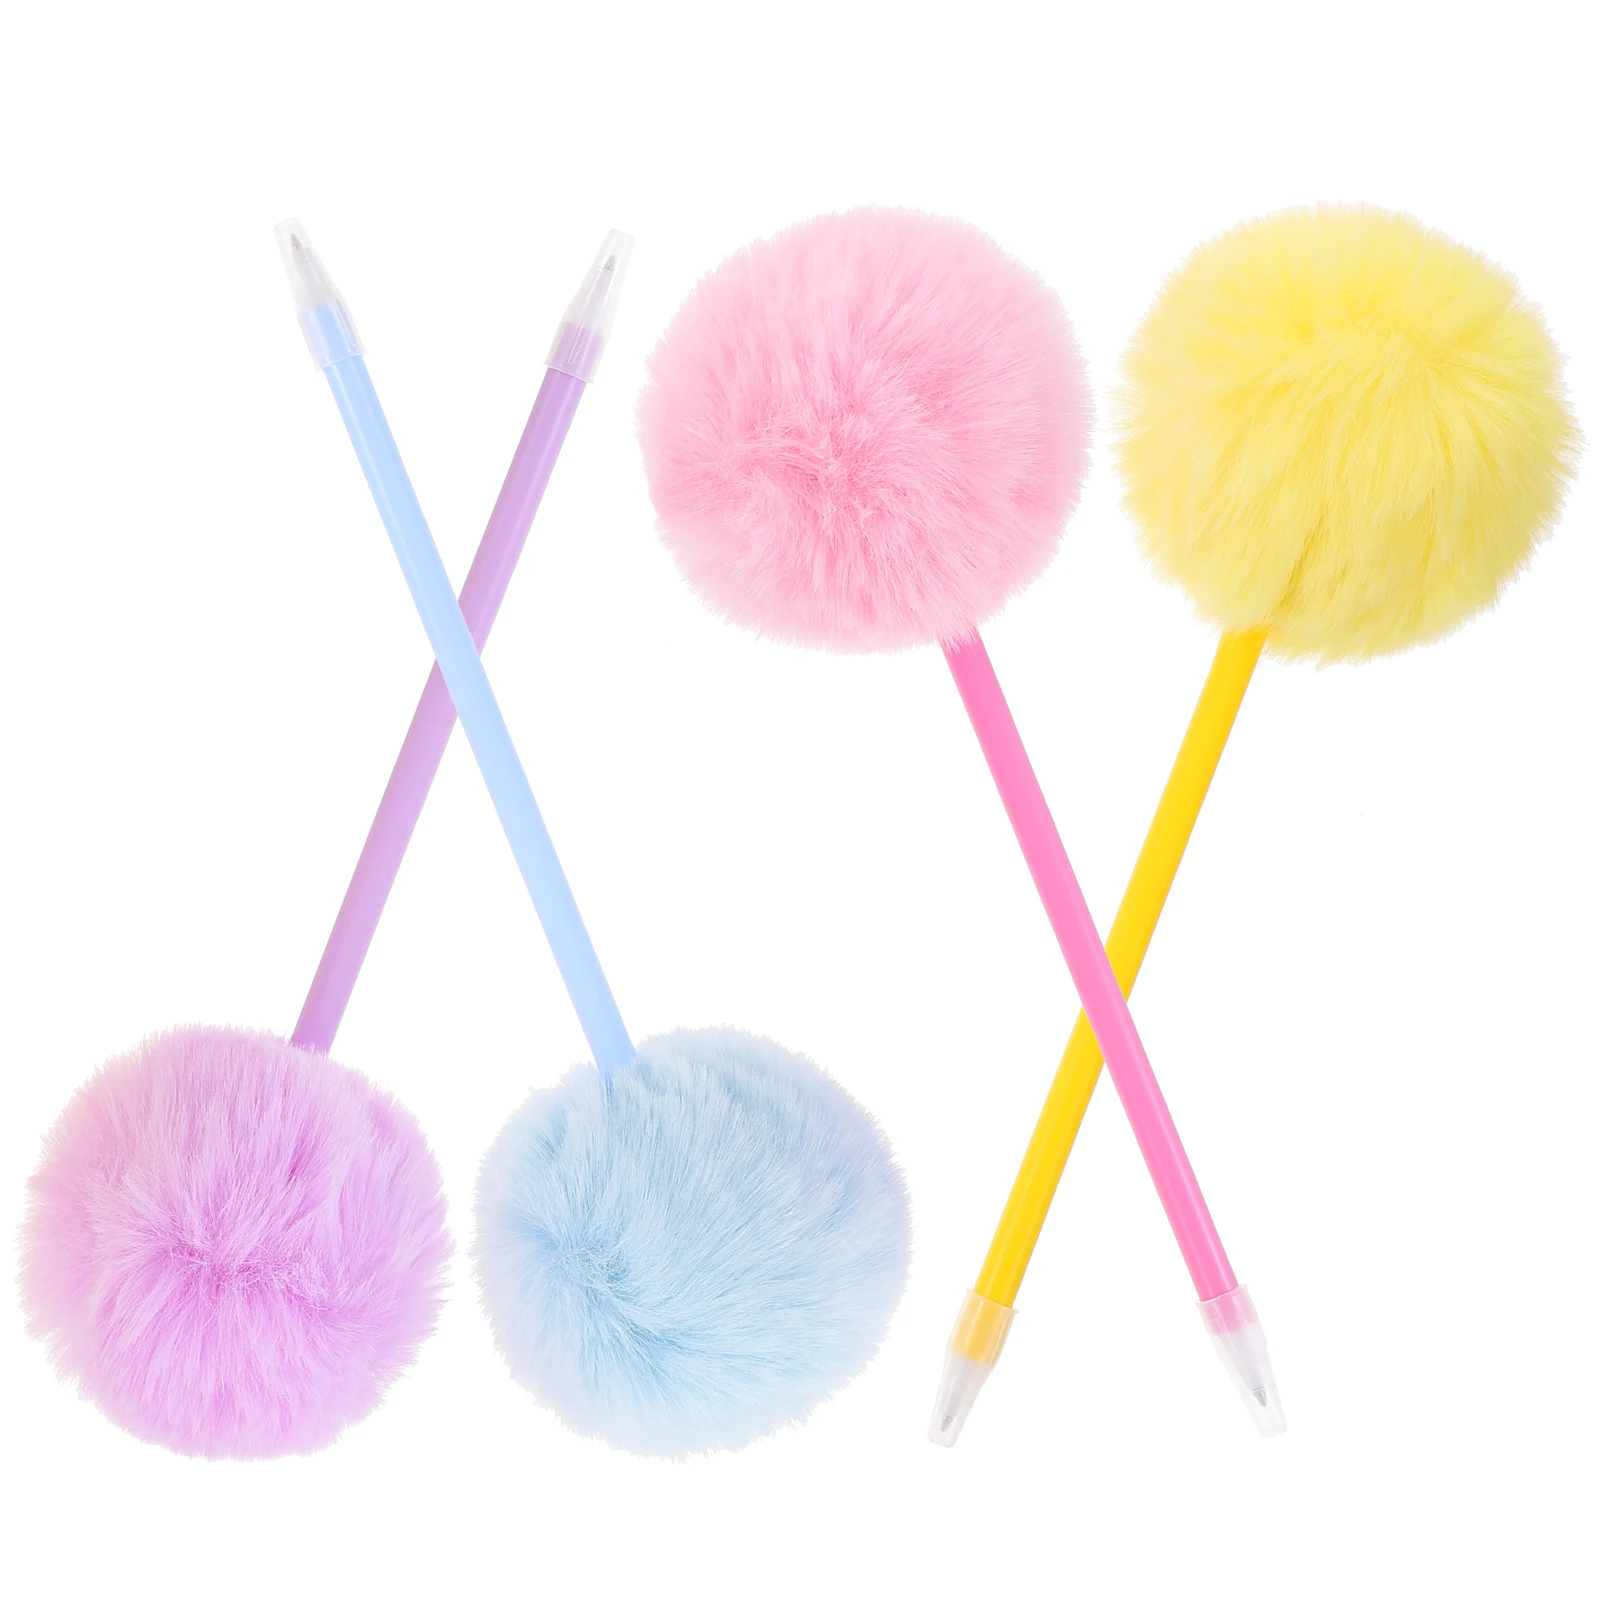 4 Pcs Hair Ball Writing Pen Ballpoint Pens Pompom Fluffy Cute Lovely for Cartoon Cute Pp Decorative Student Girls wolf hair wooden writing paint brushes pen traditional ink chinese calligraphy brush set for drawing small regular script supply